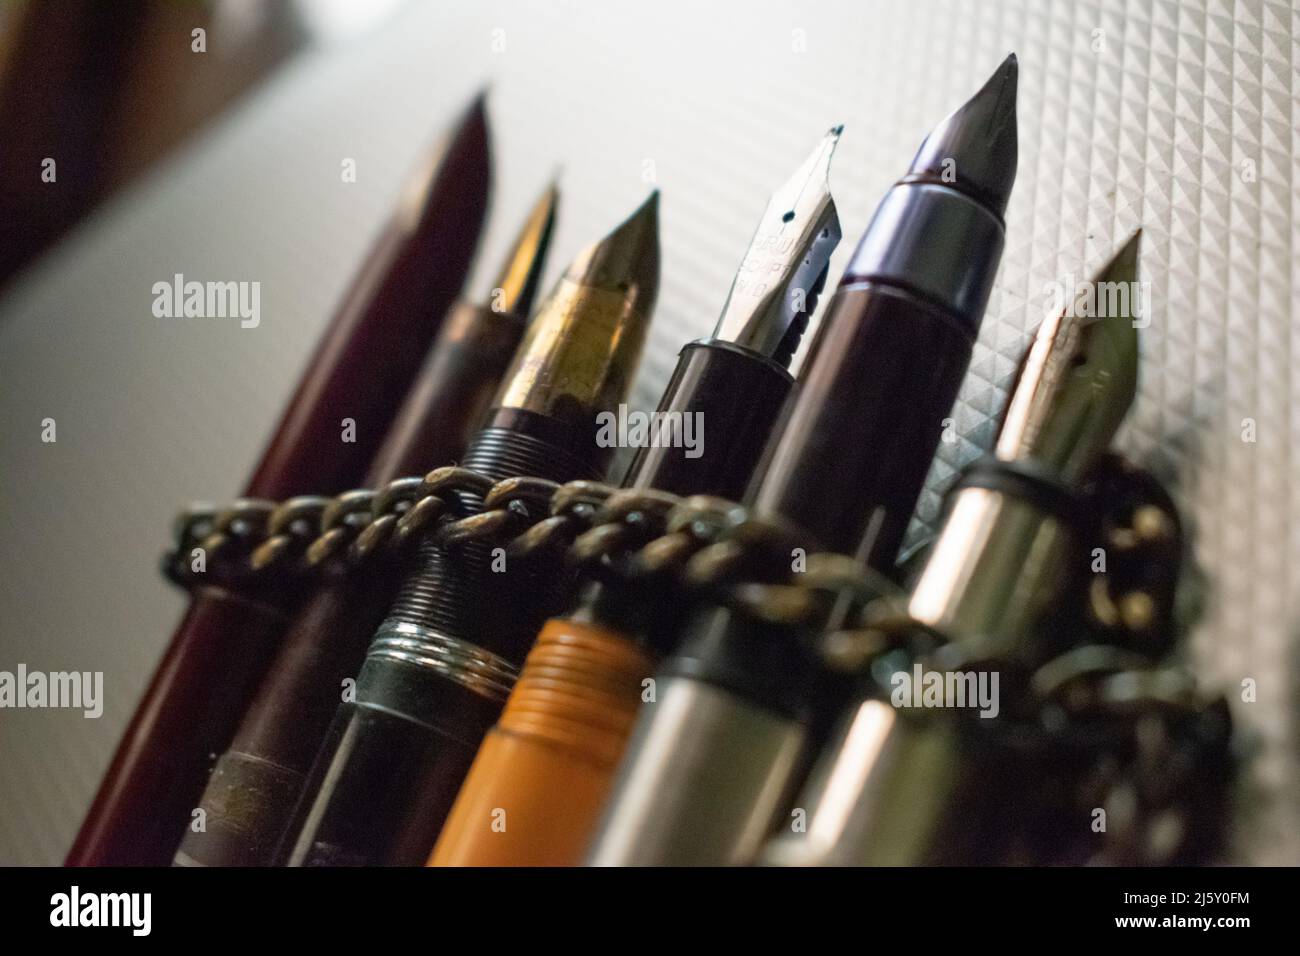 Few pens wrapped in an iron chain lies on table. Concept- restriction of freedom of speech. Stock Photo